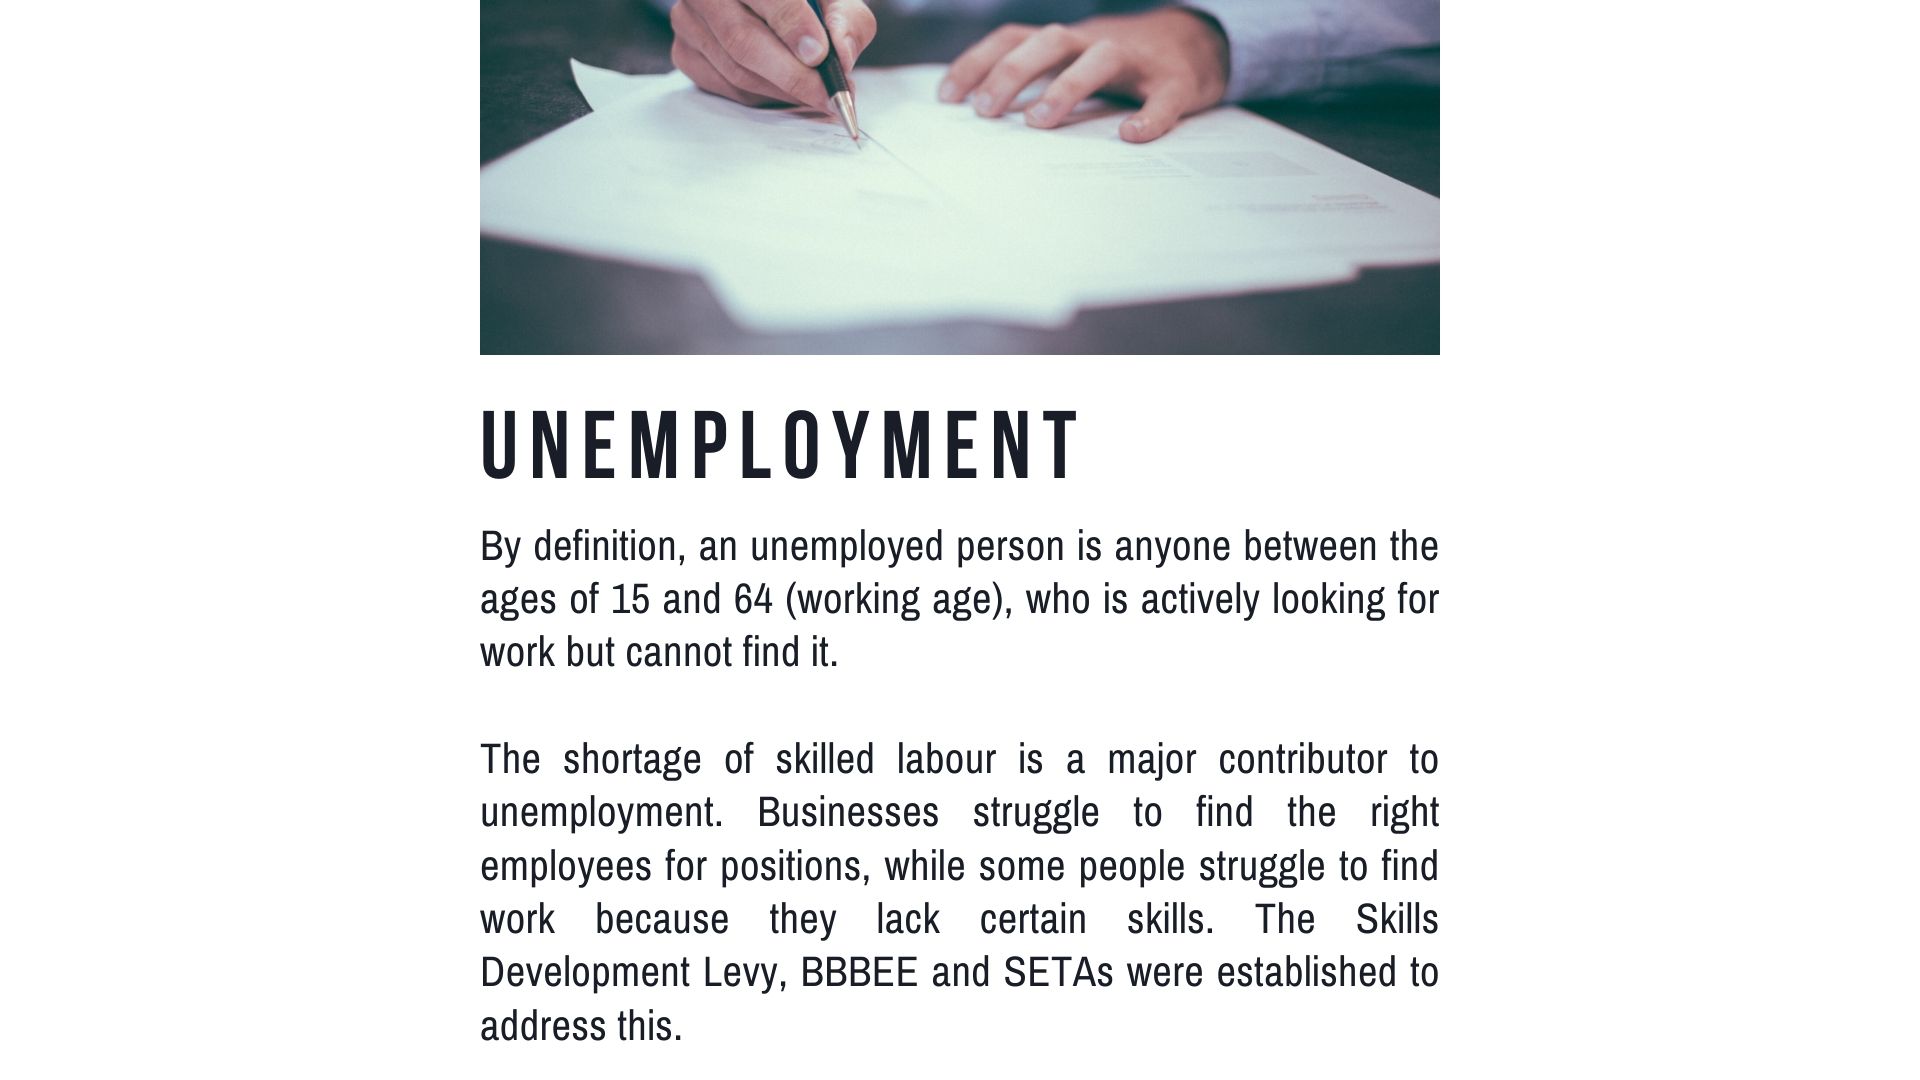 List of South African Contemporary Socio-Economic Issues - Definition and explanation of unemployment